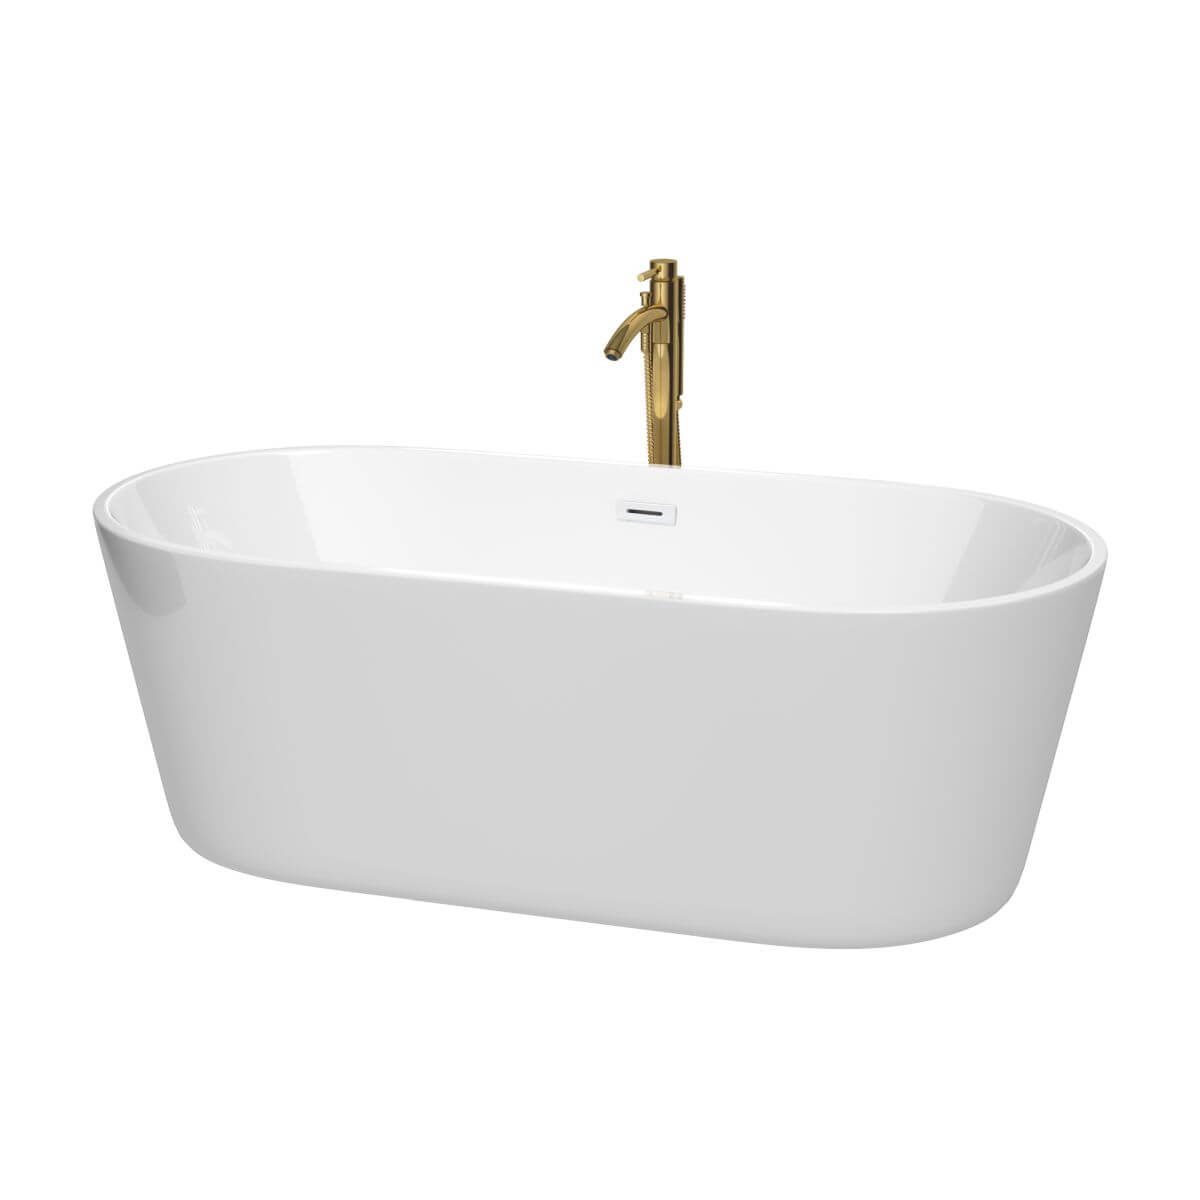 Wyndham Collection Carissa 67 inch Freestanding Bathtub in White with Shiny White Trim and Floor Mounted Faucet in Brushed Gold - WCOBT101267SWATPGD